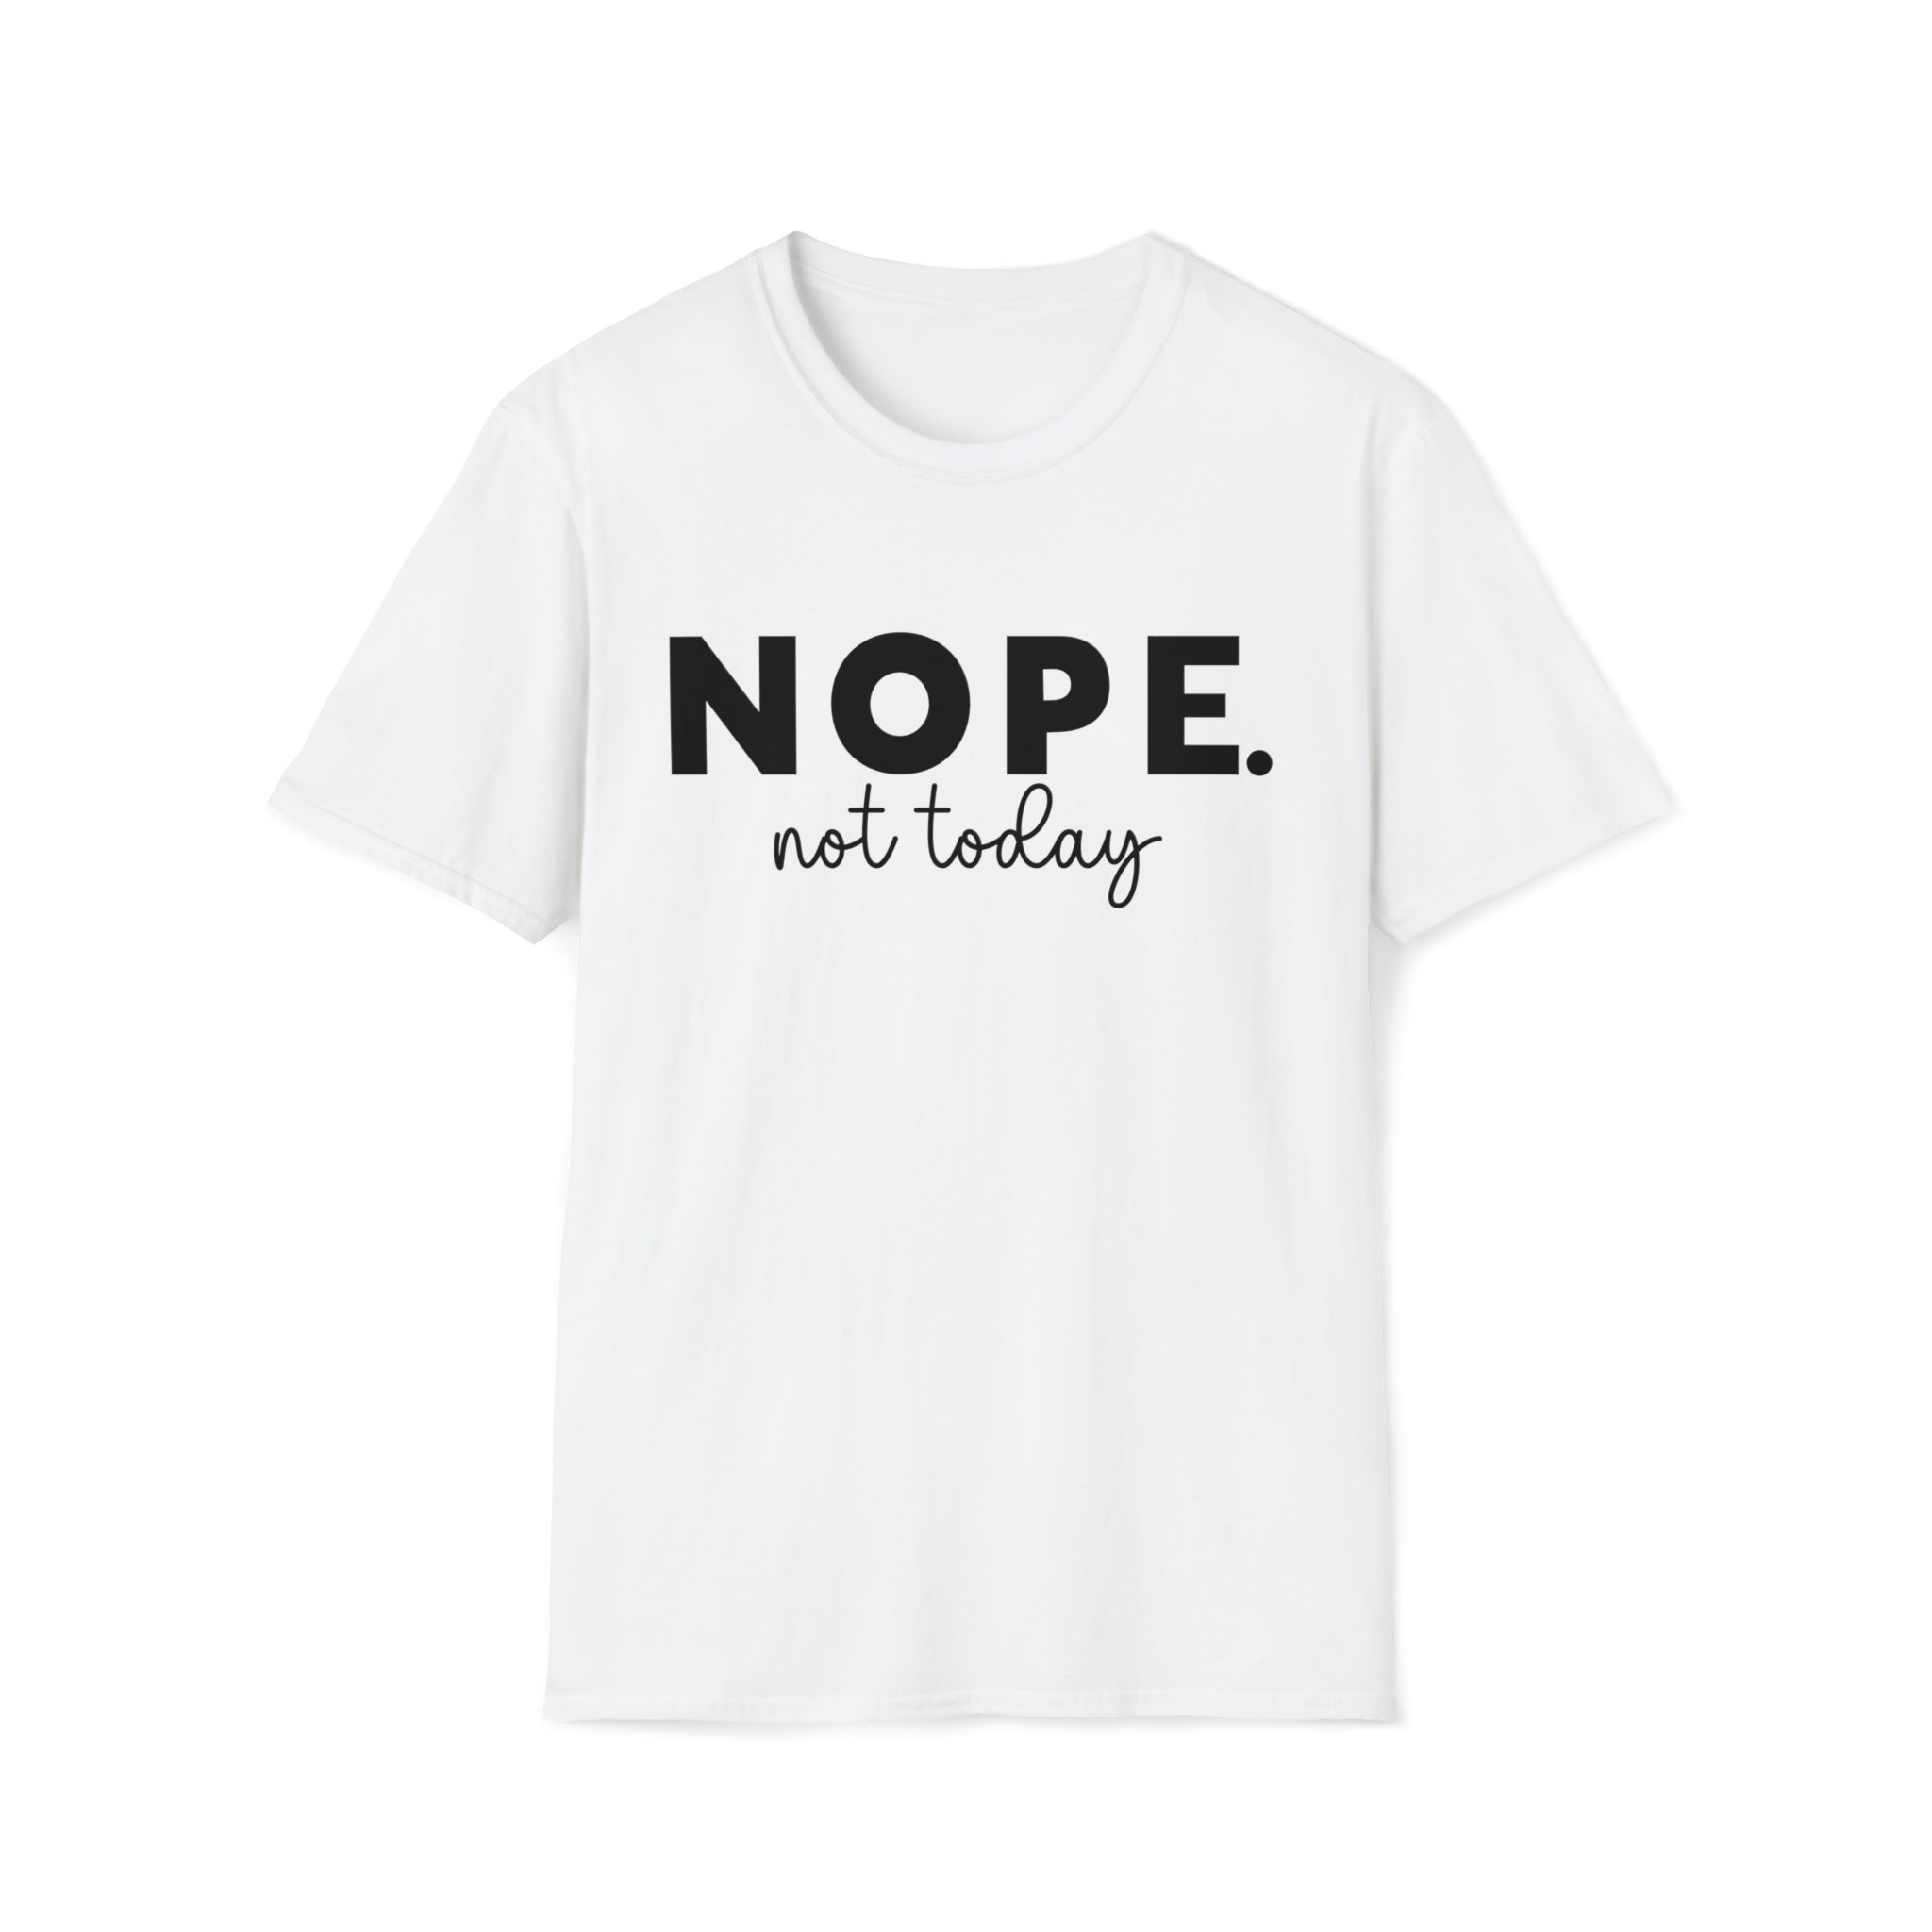 Nope Tshirt - Nope Shi Not – Not Front and Tomorrow Boldly Back Either Today, T Sideways